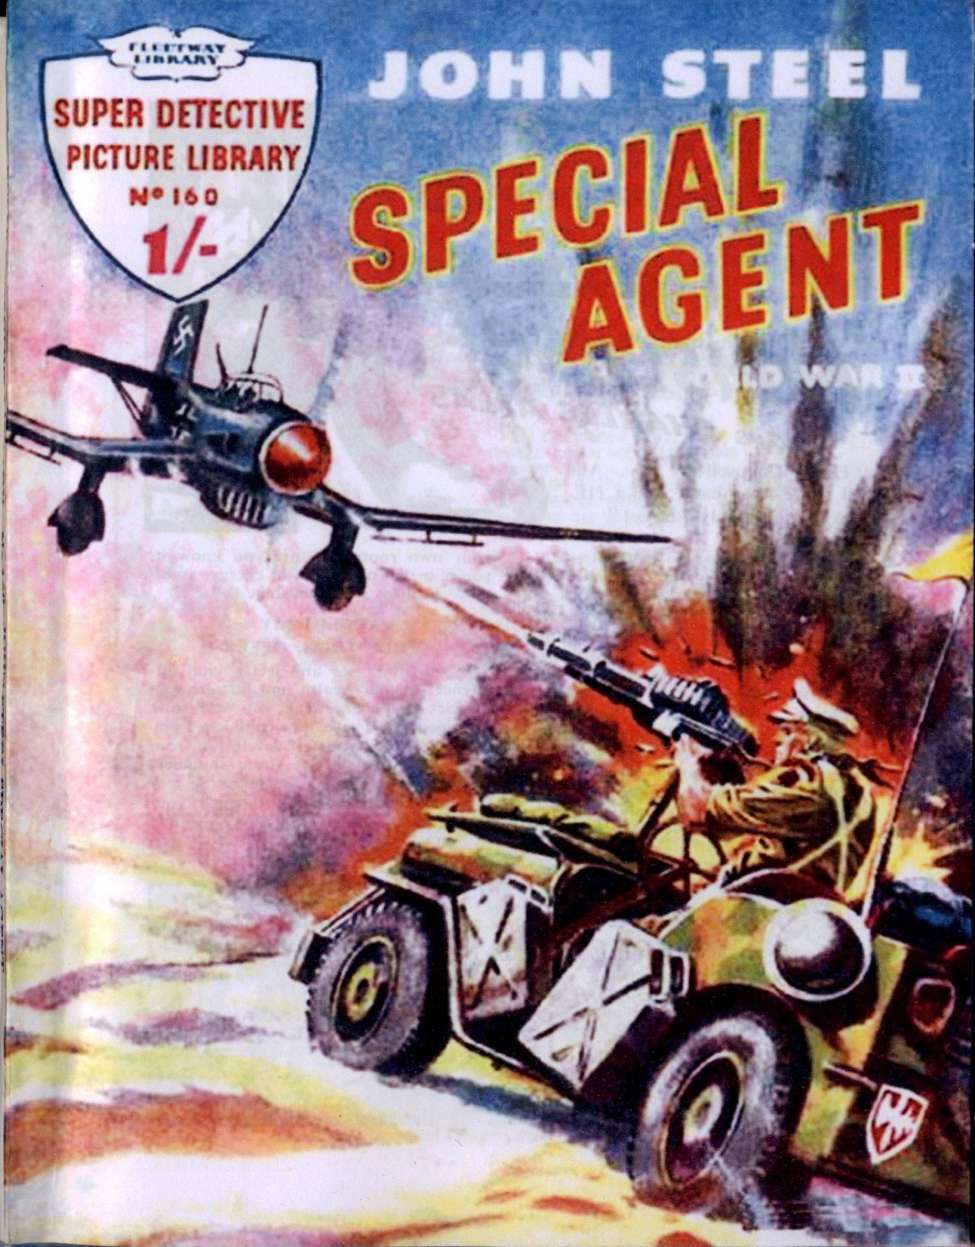 Book Cover For Super Detective Library 160 - John Steel Special Agent